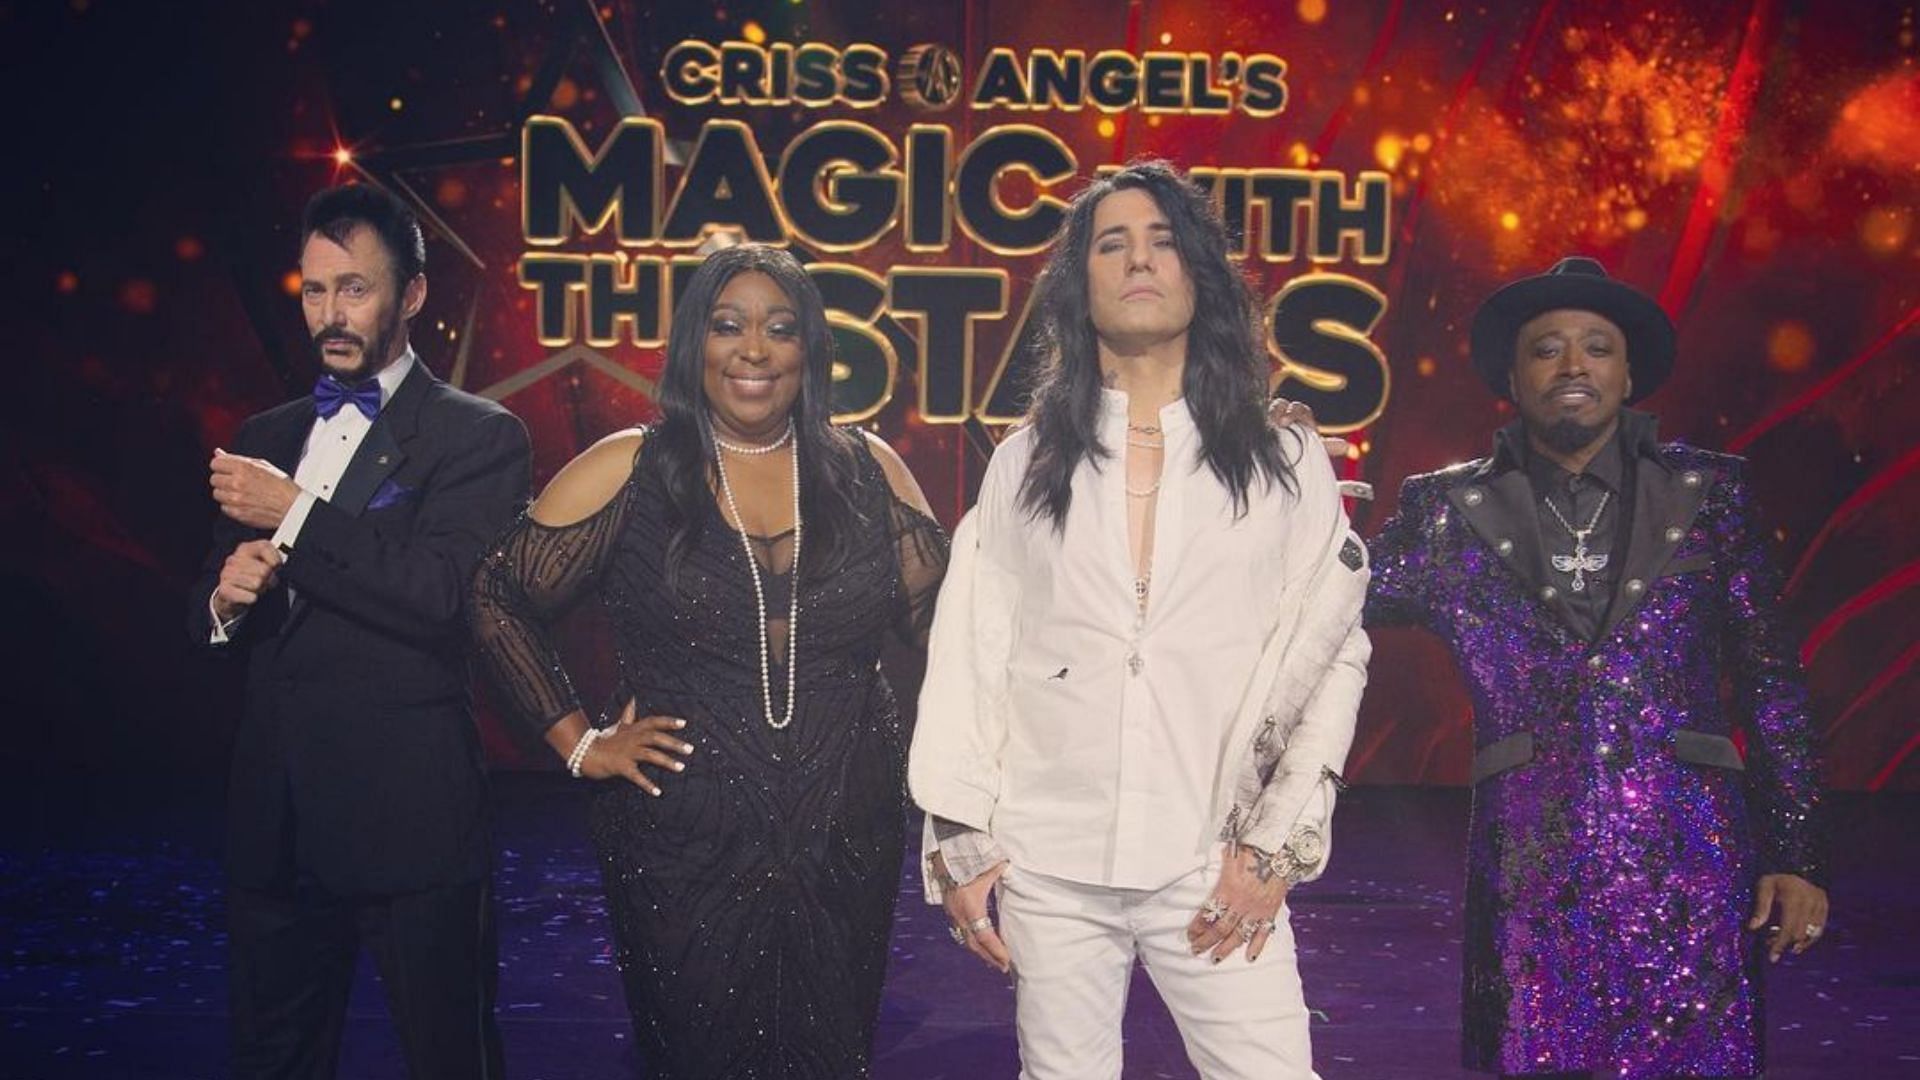 What time will Criss Angel's Magic with the Stars premiere on The CW